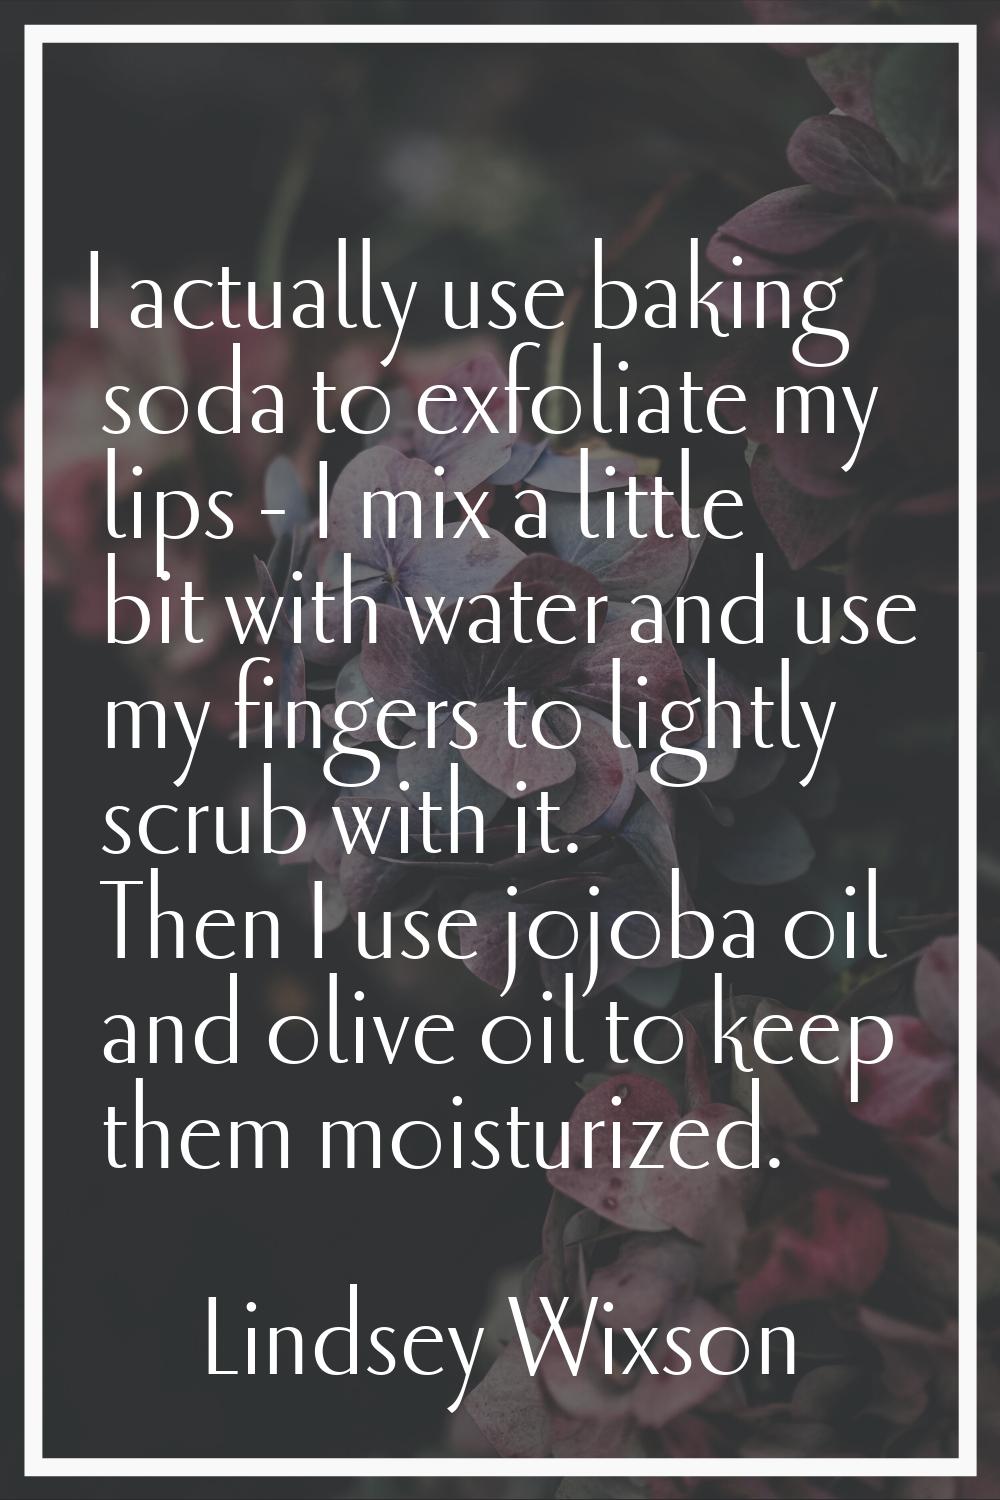 I actually use baking soda to exfoliate my lips - I mix a little bit with water and use my fingers 